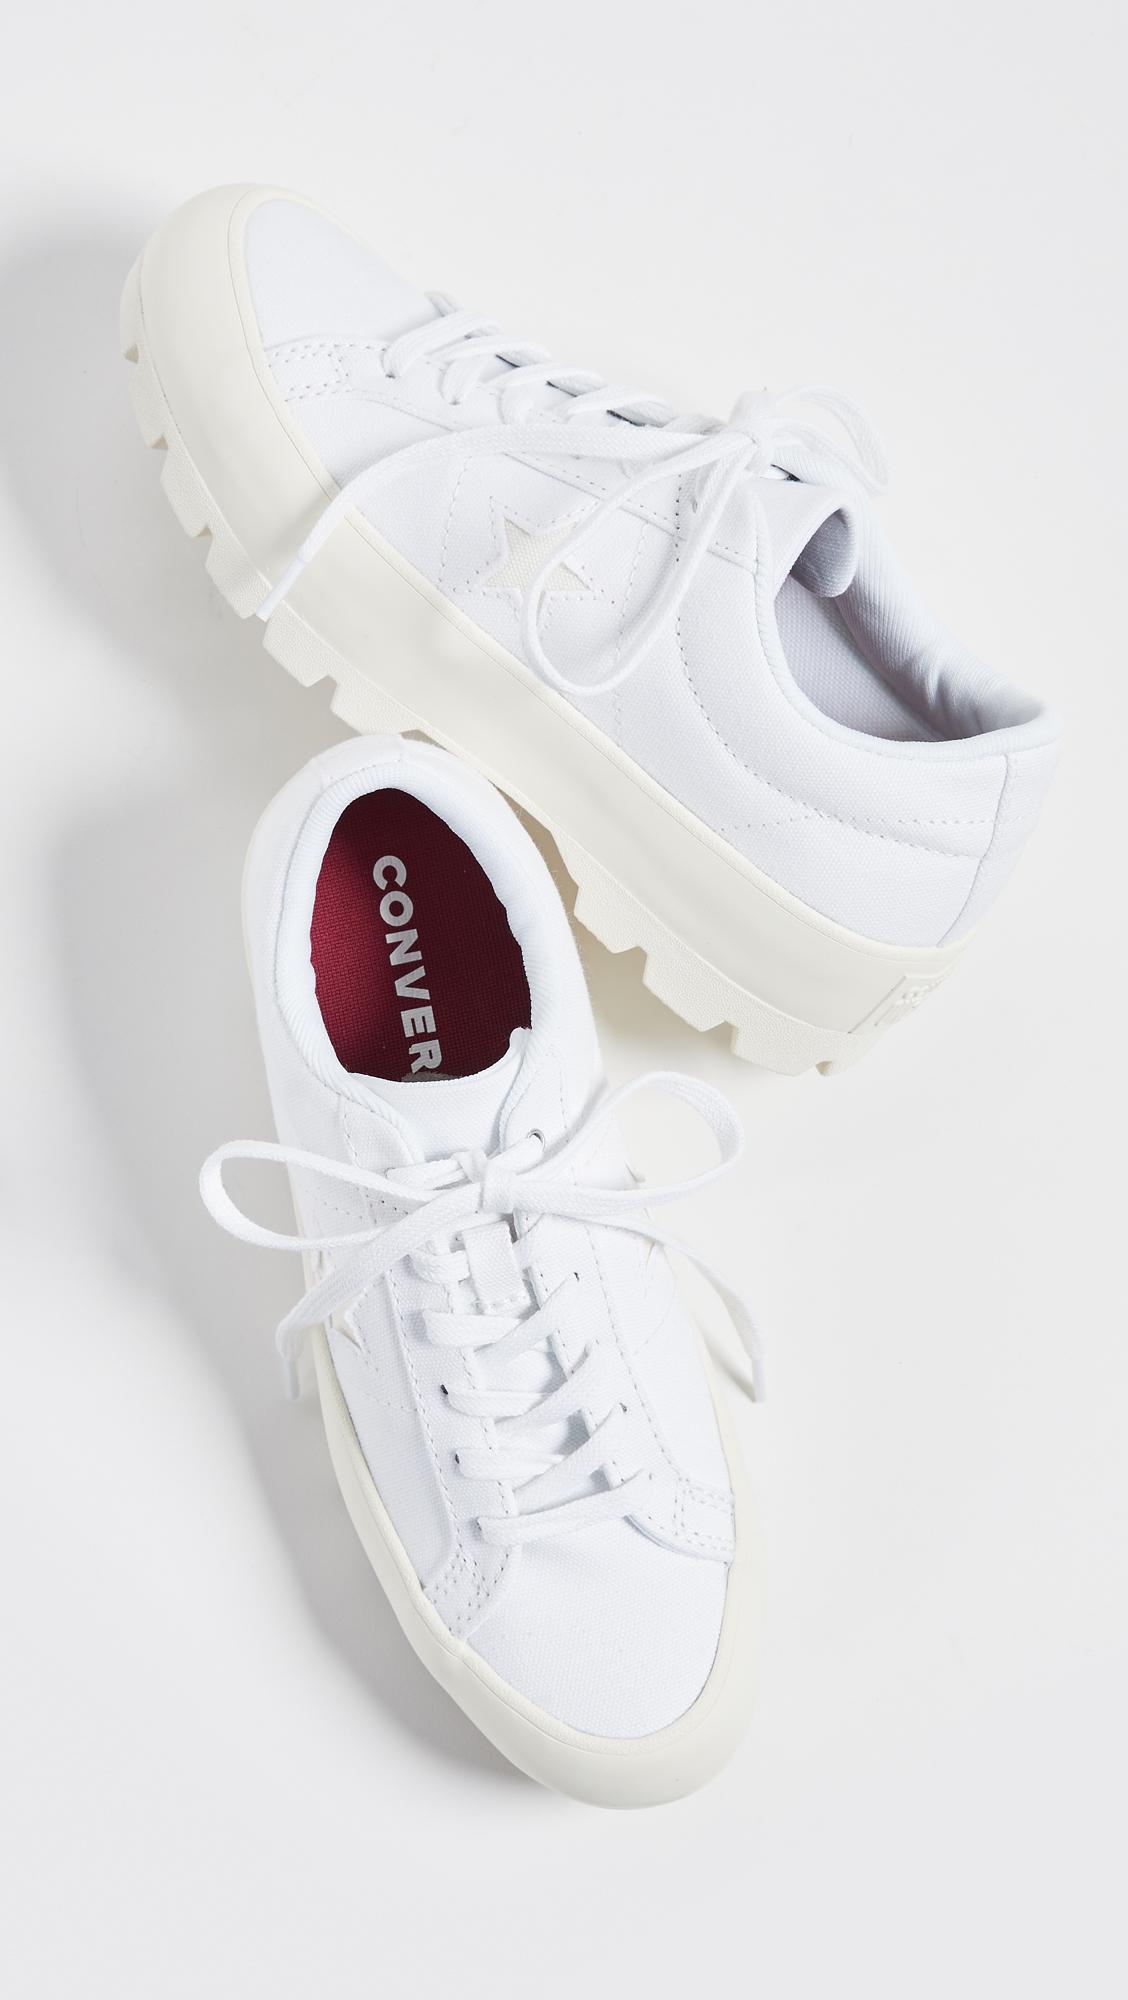 Converse One Star Lugged Ox Sneakers in White | Lyst